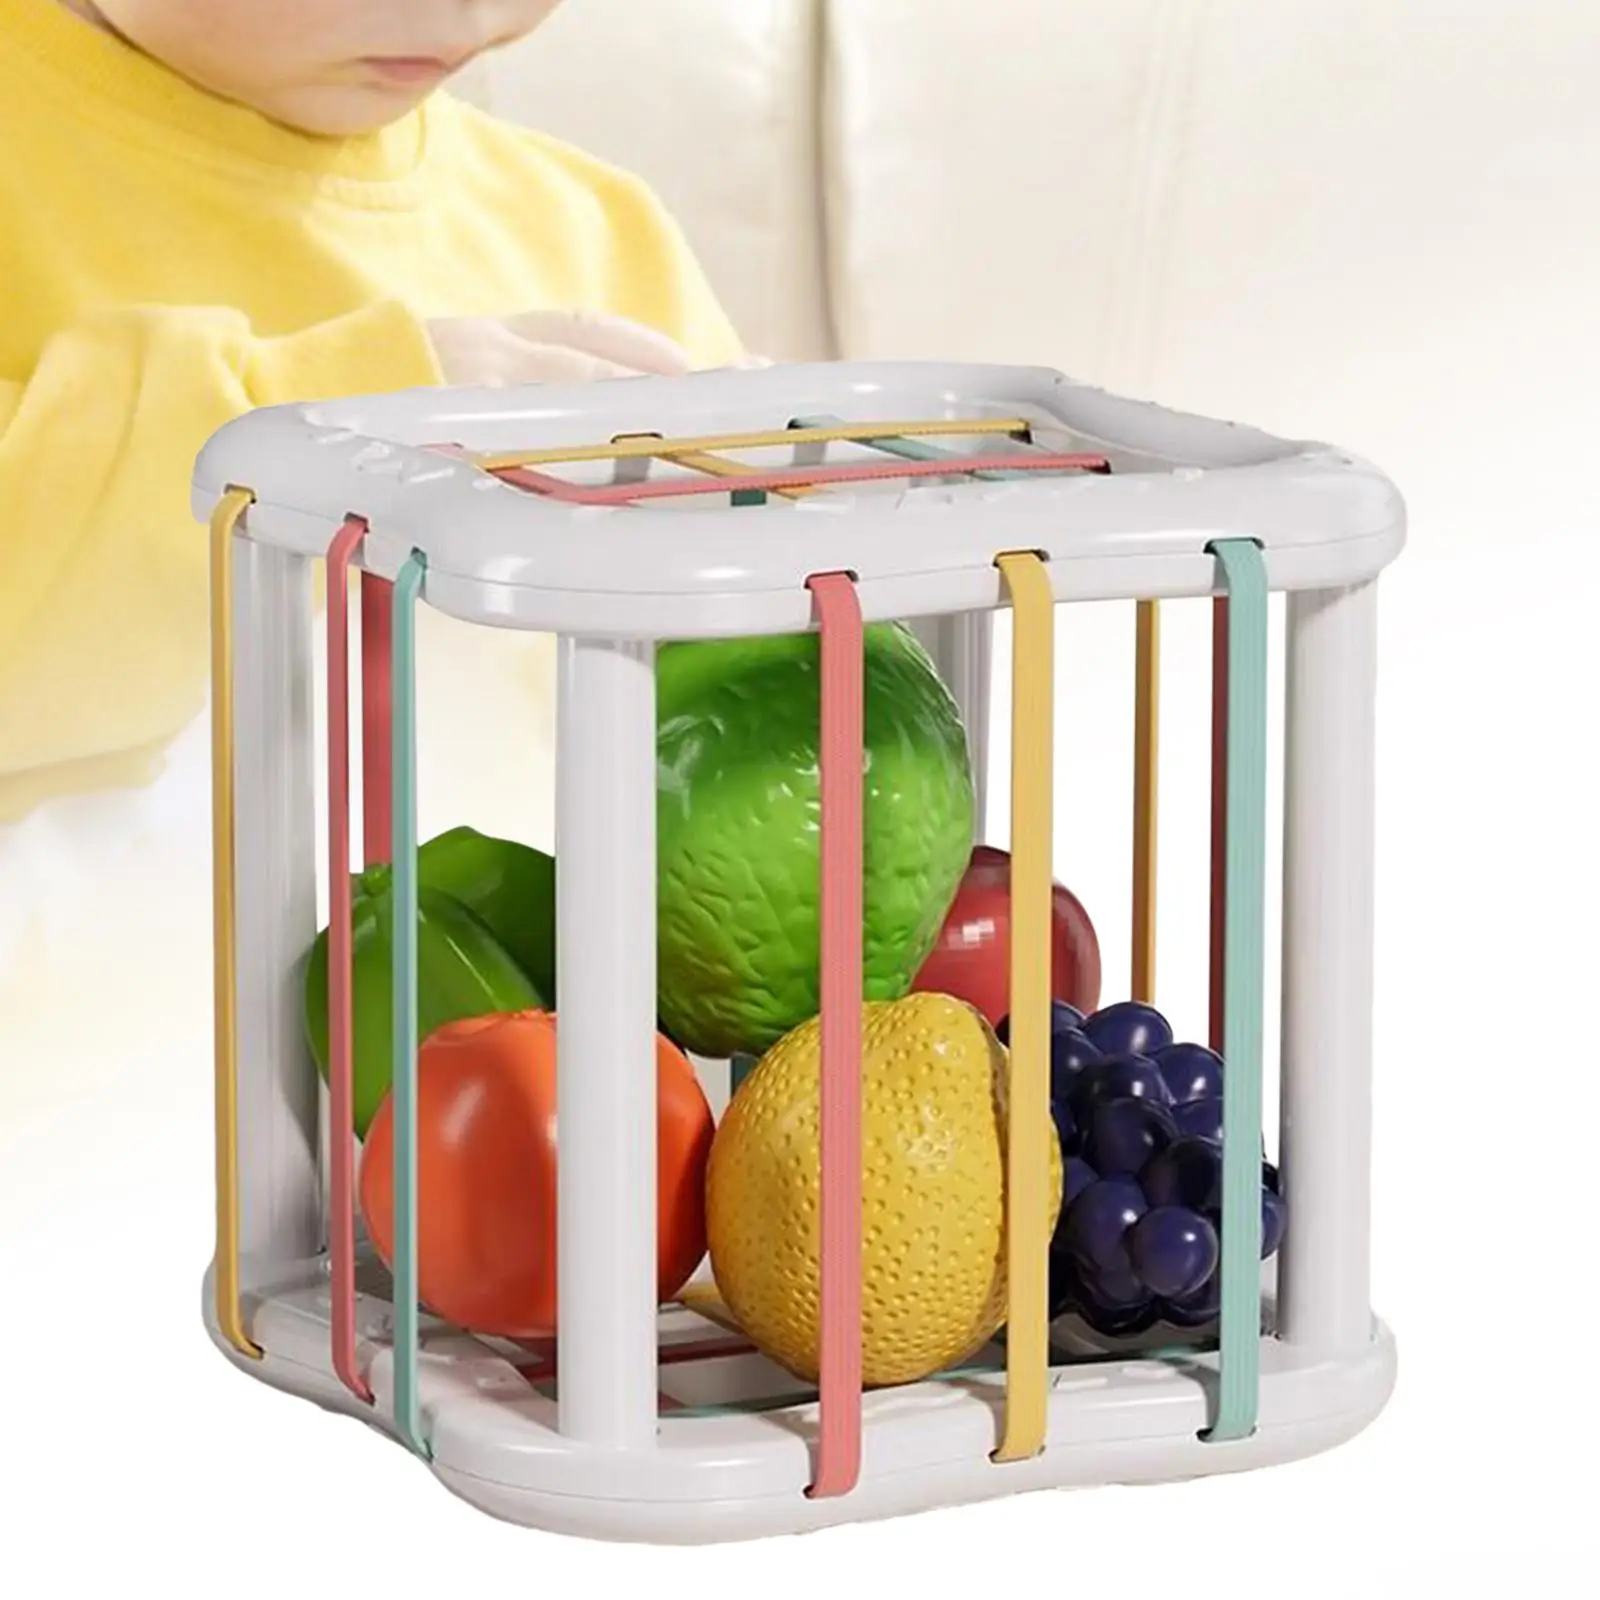 Baby Shape Sorter Toys Motor Skills Color Recognition Storage Cube Bin for Girls Boys Children Kids Toddlers Holiday Gifts